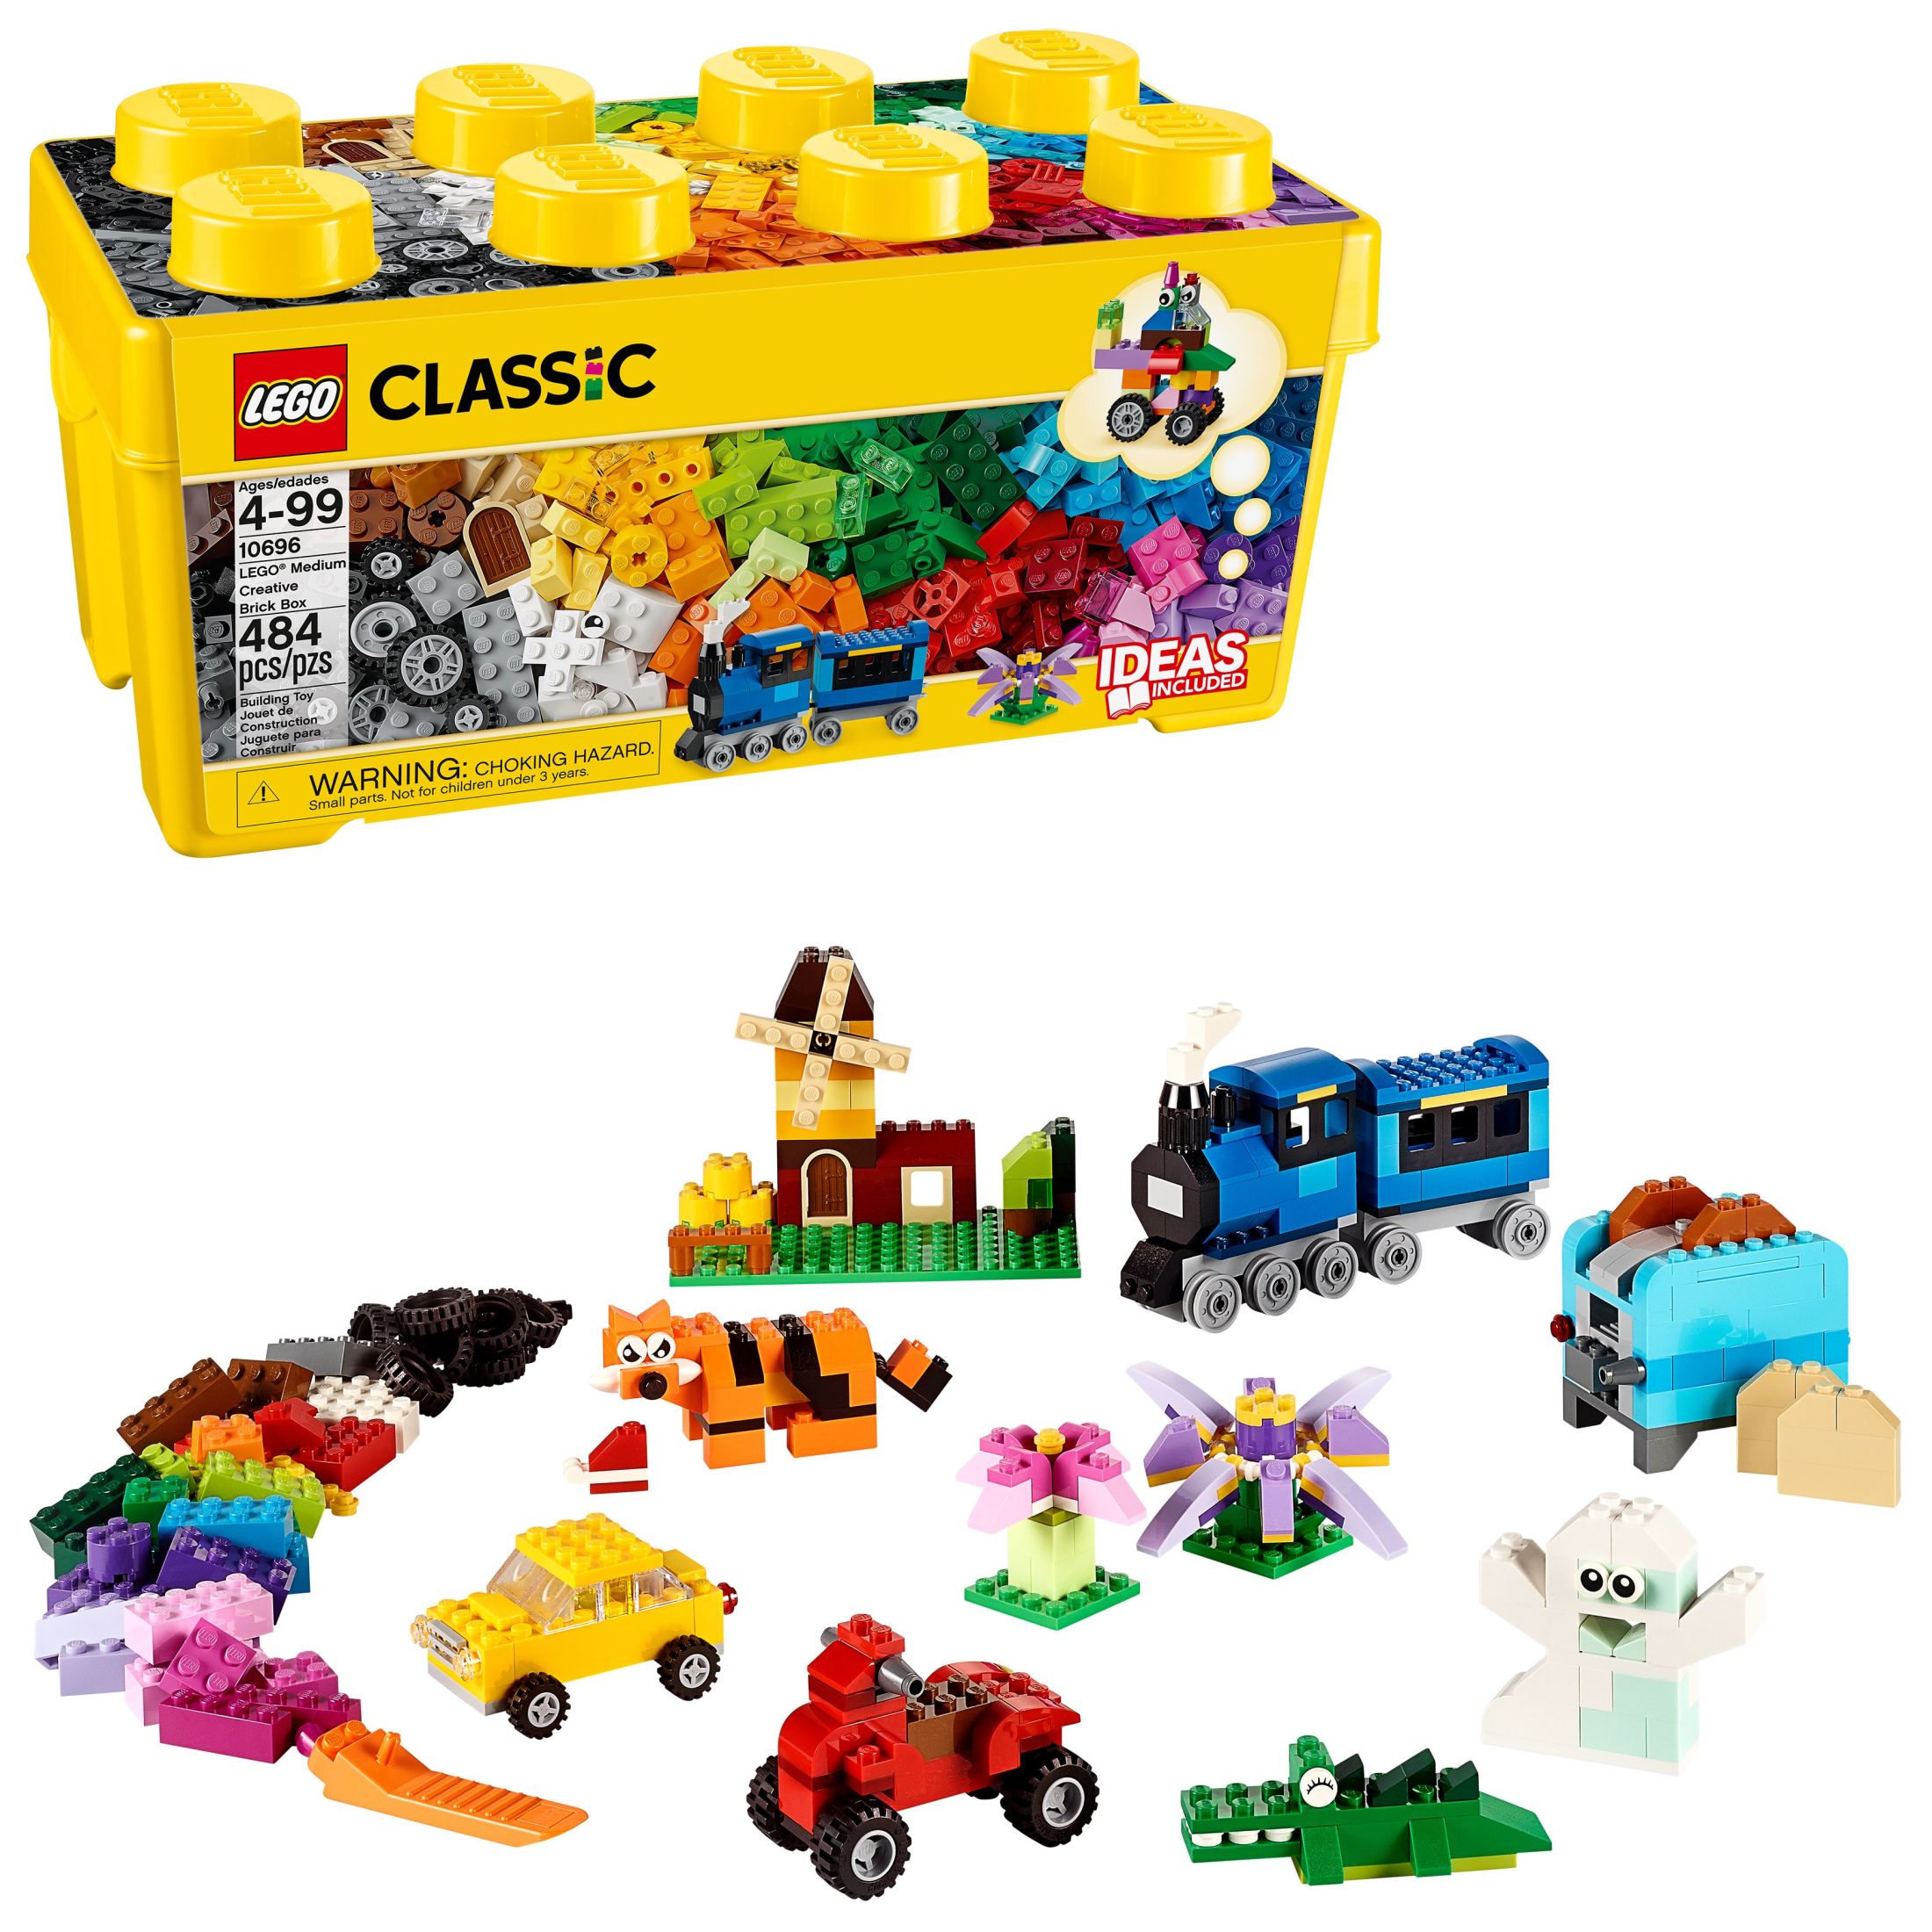 LEGO Classic Medium Creative Brick Box 10696 Building Toy Set with Storage, Includes Train, Car, and a Tiger Figure, Perfect Gift and Playset for Boys and Girls, Sensory Toy for Kids Ages 4 and up - image 1 of 6